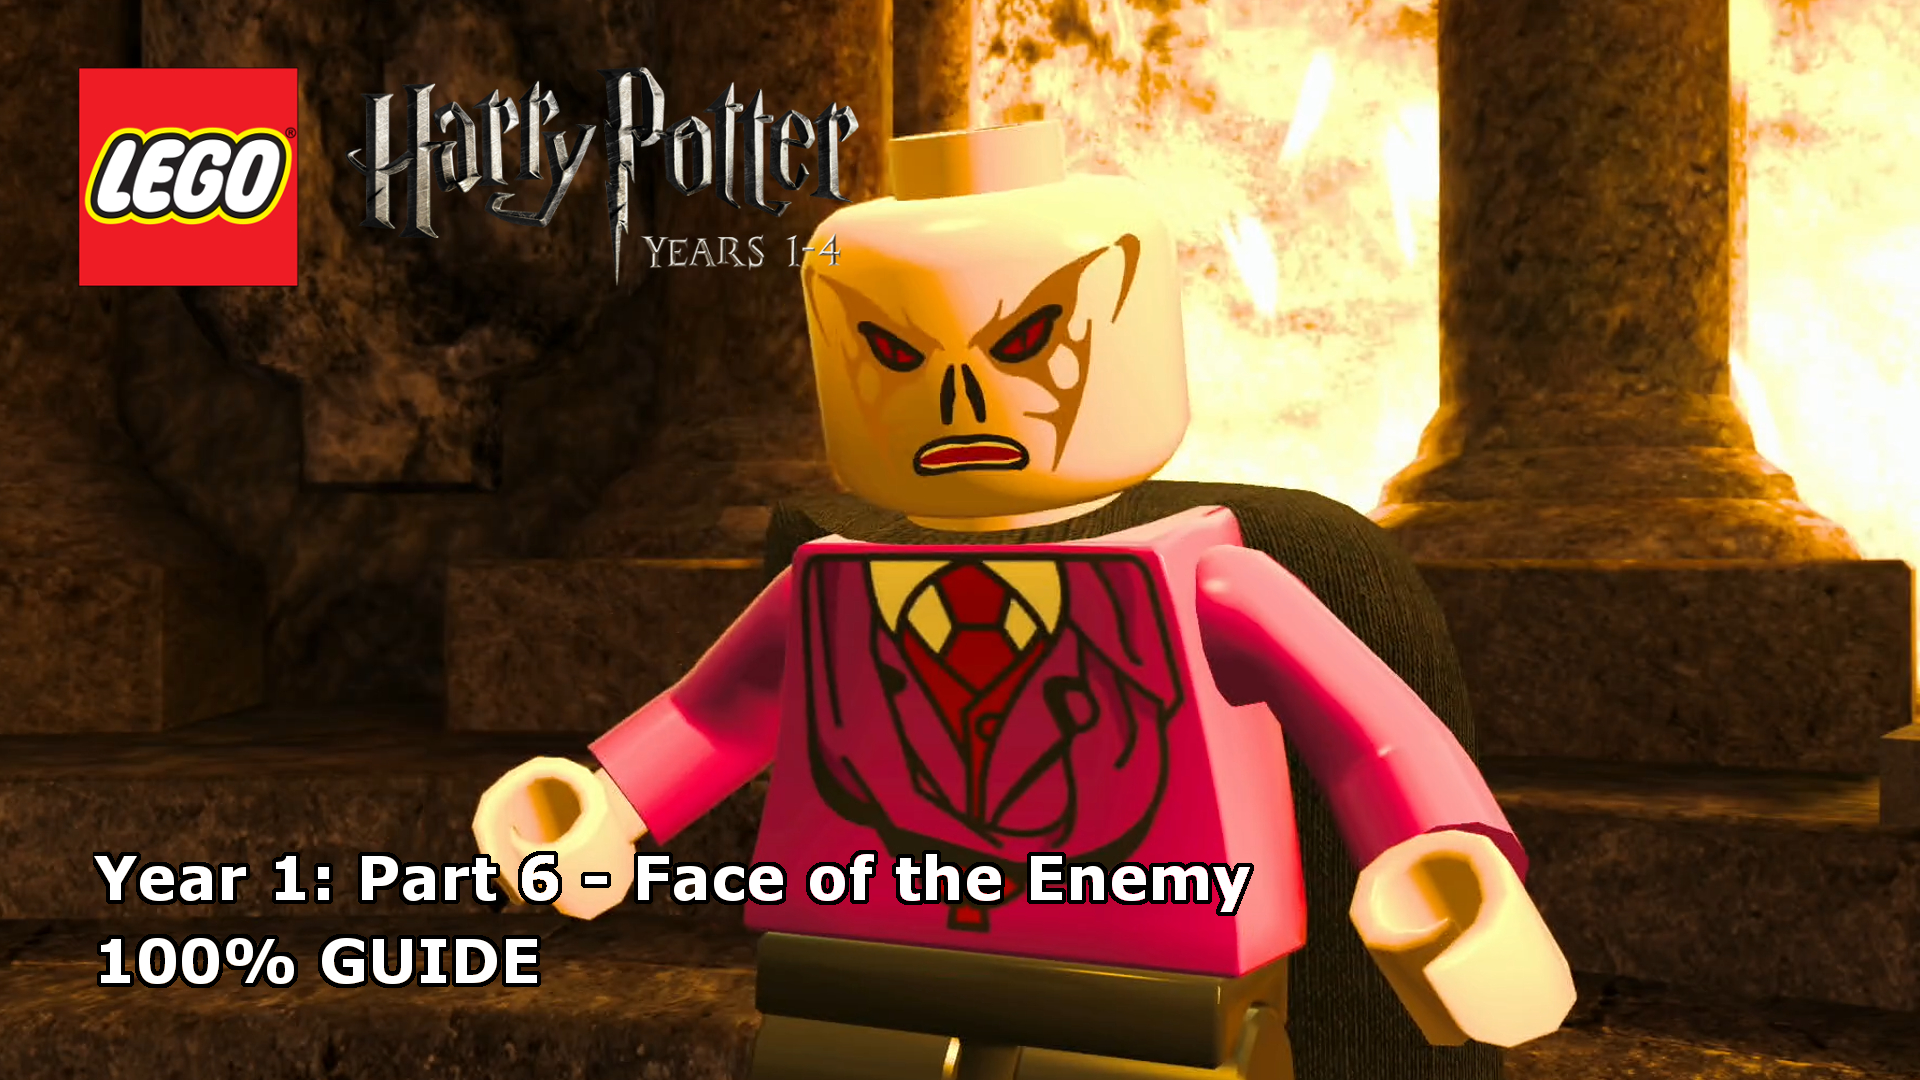 Lego Harry Potter: Years 1-4 – Face of the Enemy Guide